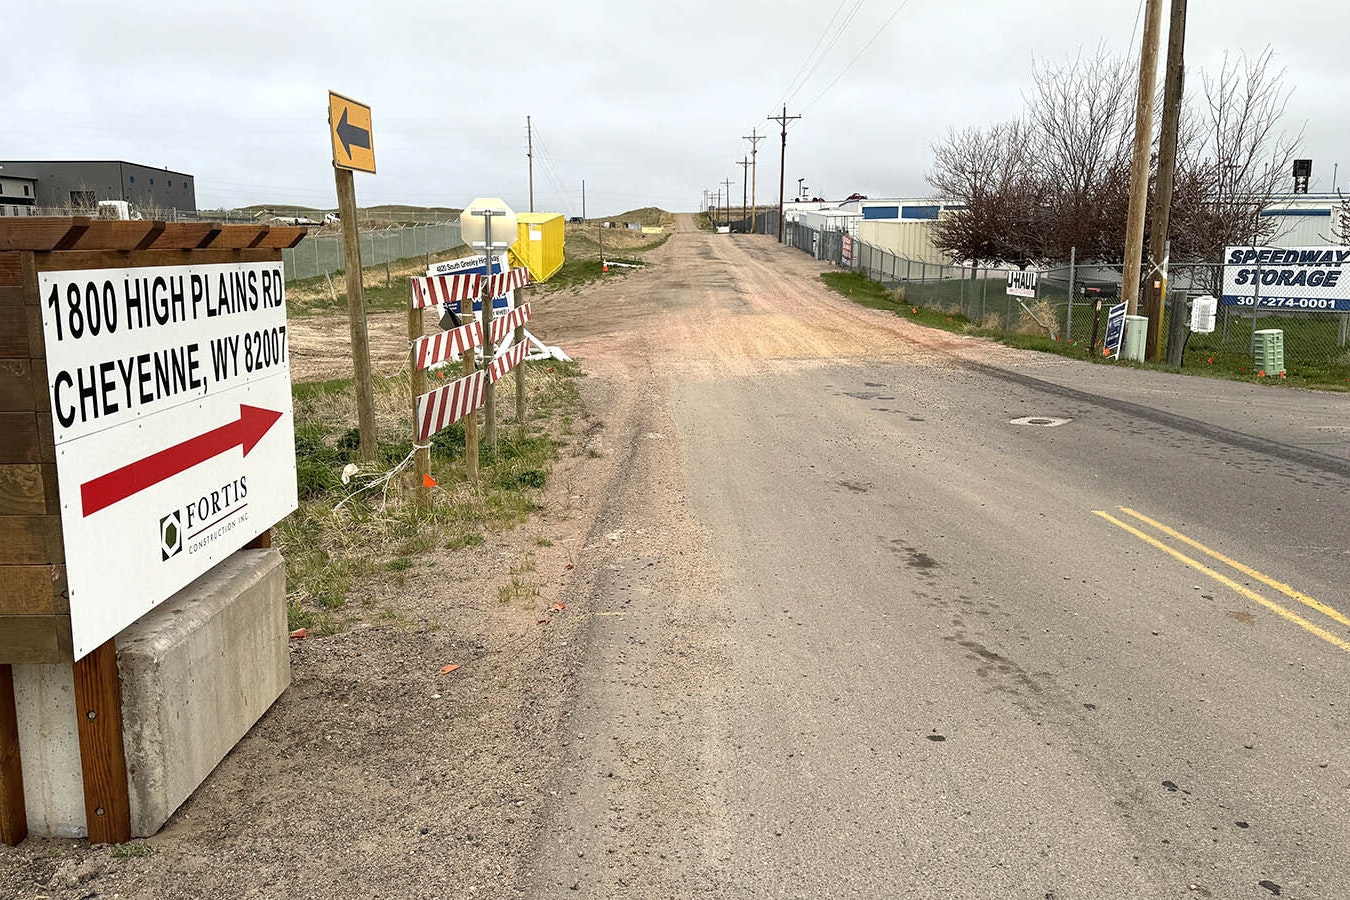 With last year’s permanent closing of the Intermountain Speedway in South Cheyenne, the road to the High Plains Business Park where the Meta enterprise data center is being built was recently renamed the High Plains Road. (